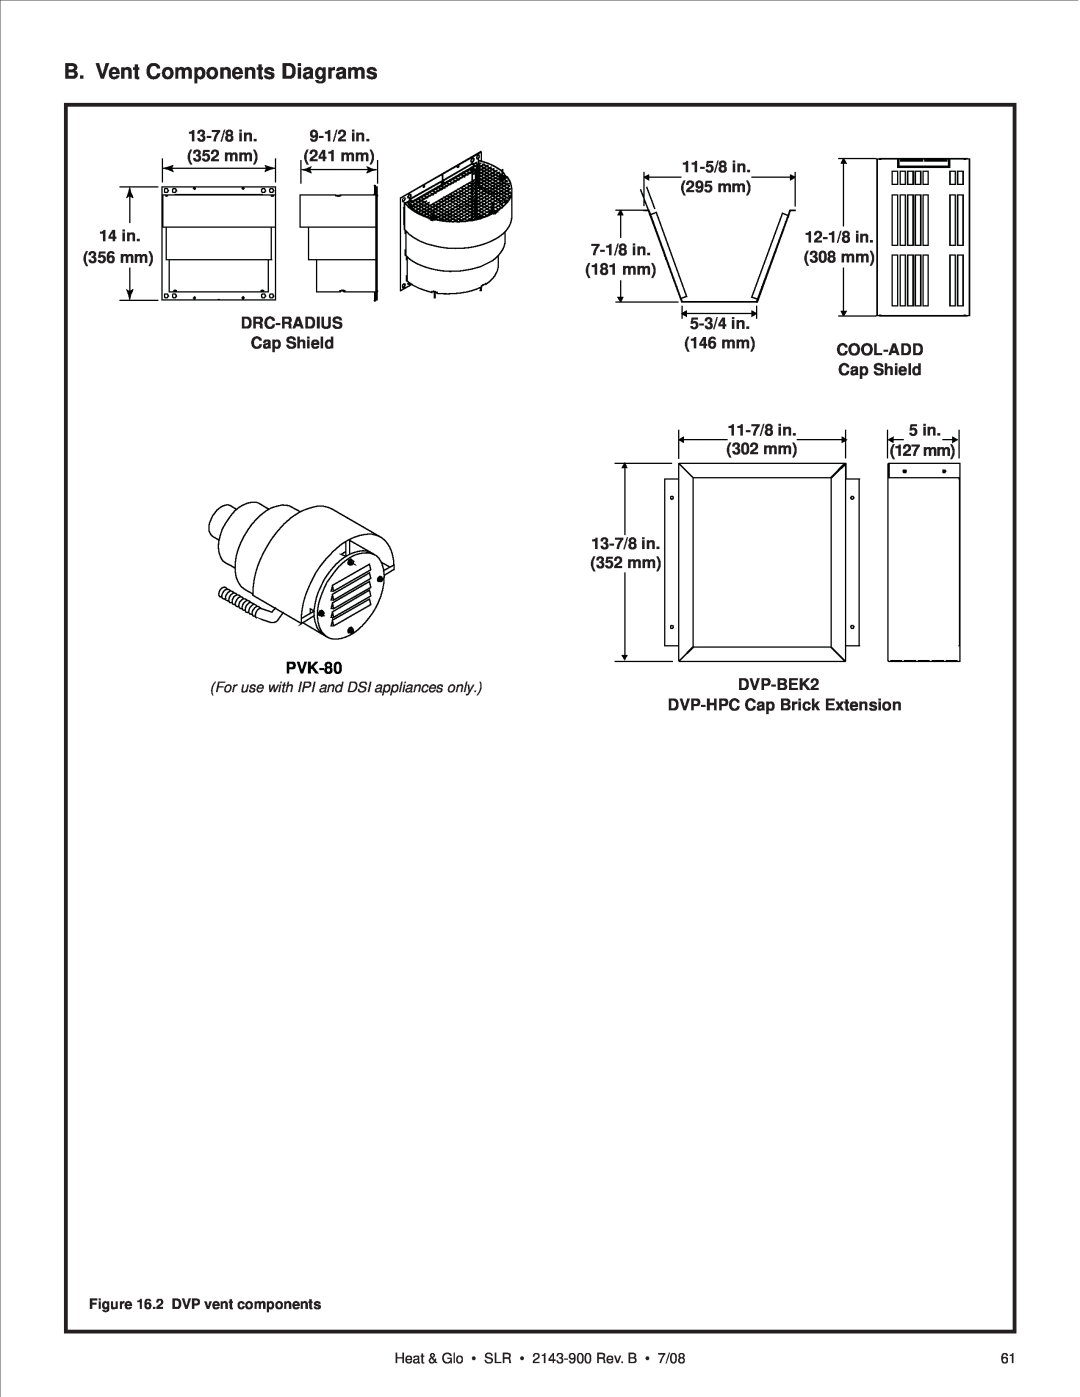 Heat & Glo LifeStyle SLR (COSMO) B. Vent Components Diagrams, 13-7/8in, 9-1/2in, 352 mm, 241 mm, 11-5/8in, 295 mm, 14 in 